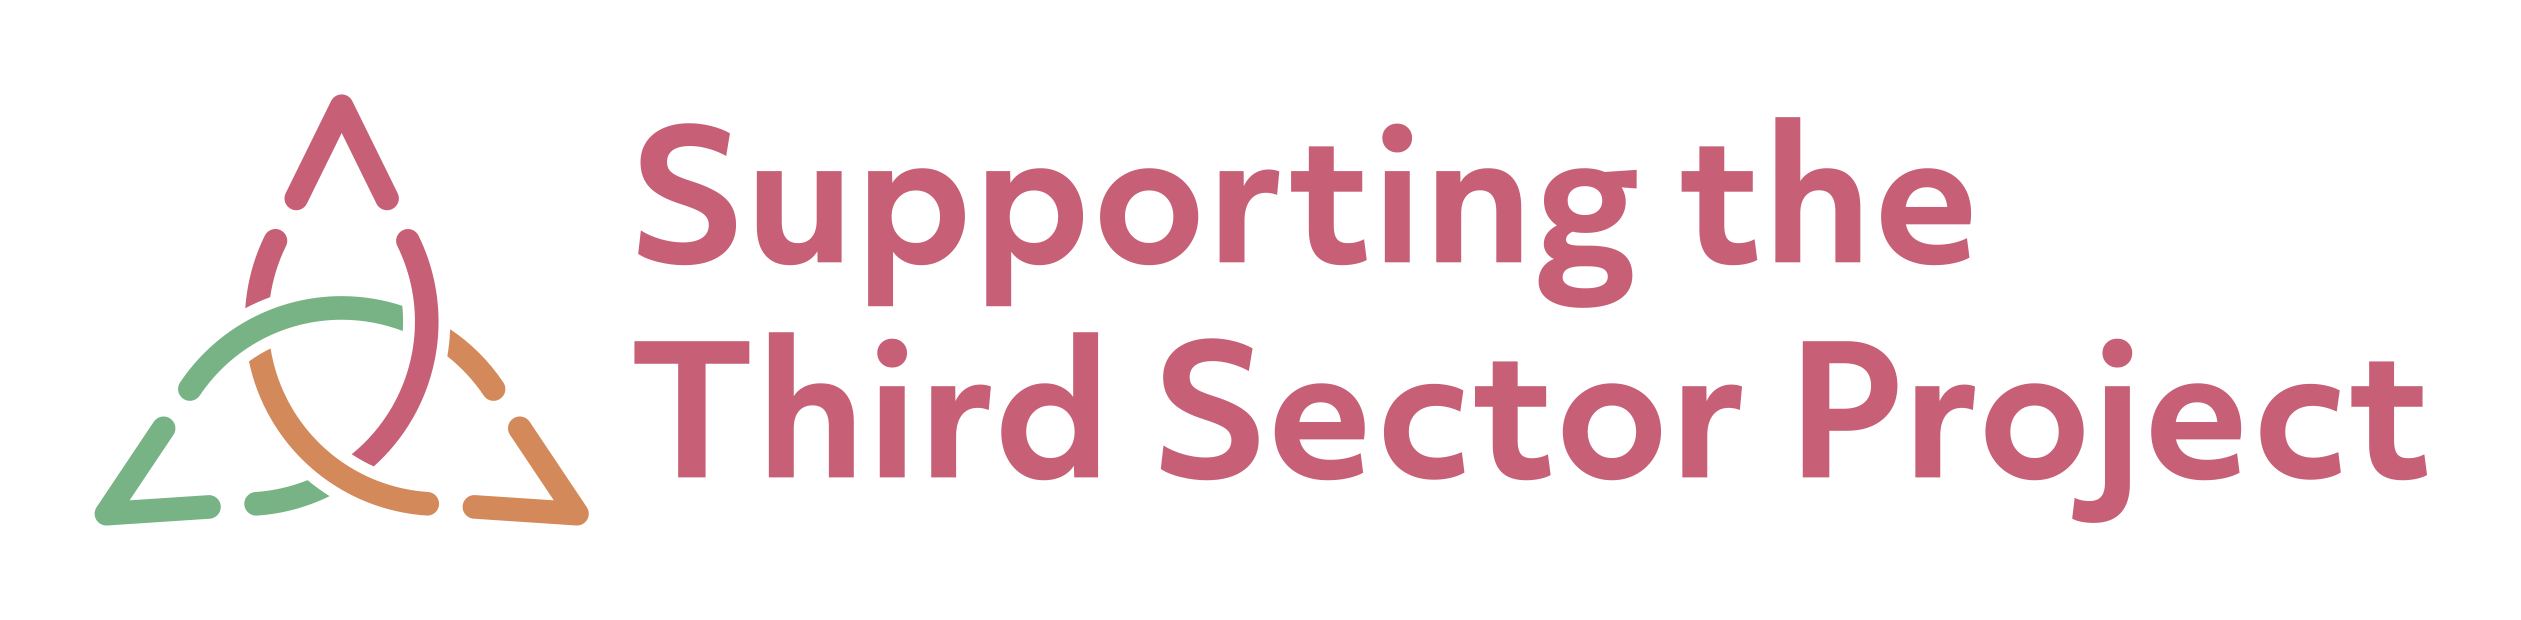 Pink text on a white background Supporting the Third Sector Project. On the left three interconnected eye-shaped discs in green pink and orange